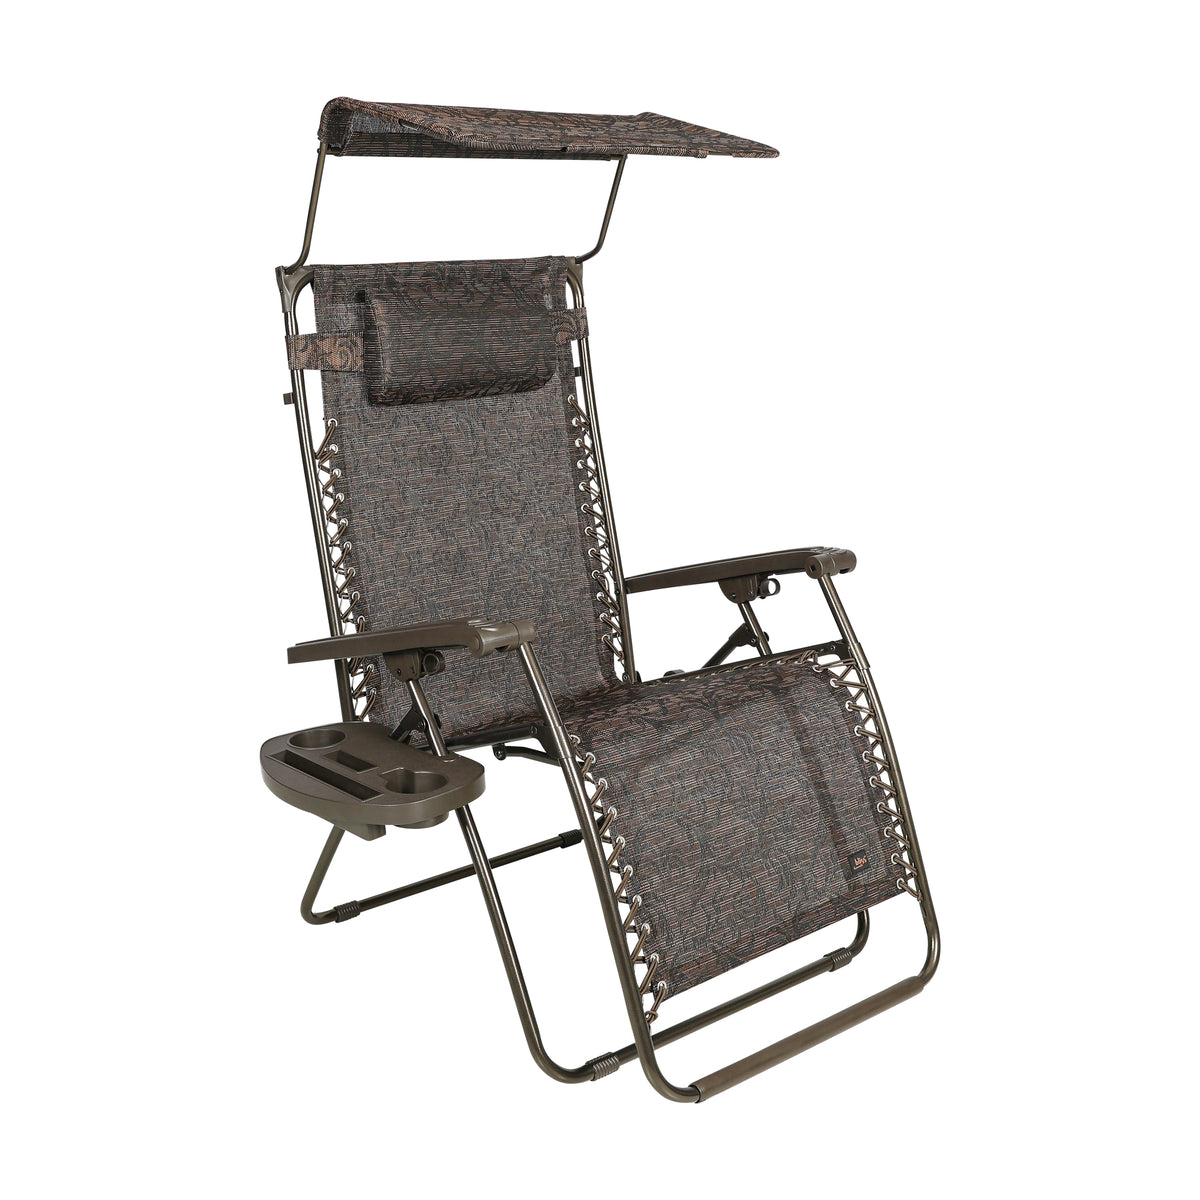 Bliss Hammocks 30-inch Wide XL Zero Gravity Chair with Adjustable Canopy Sun-Shade, Drink Tray, and Adjustable Pillow in the brown jacquard variation.